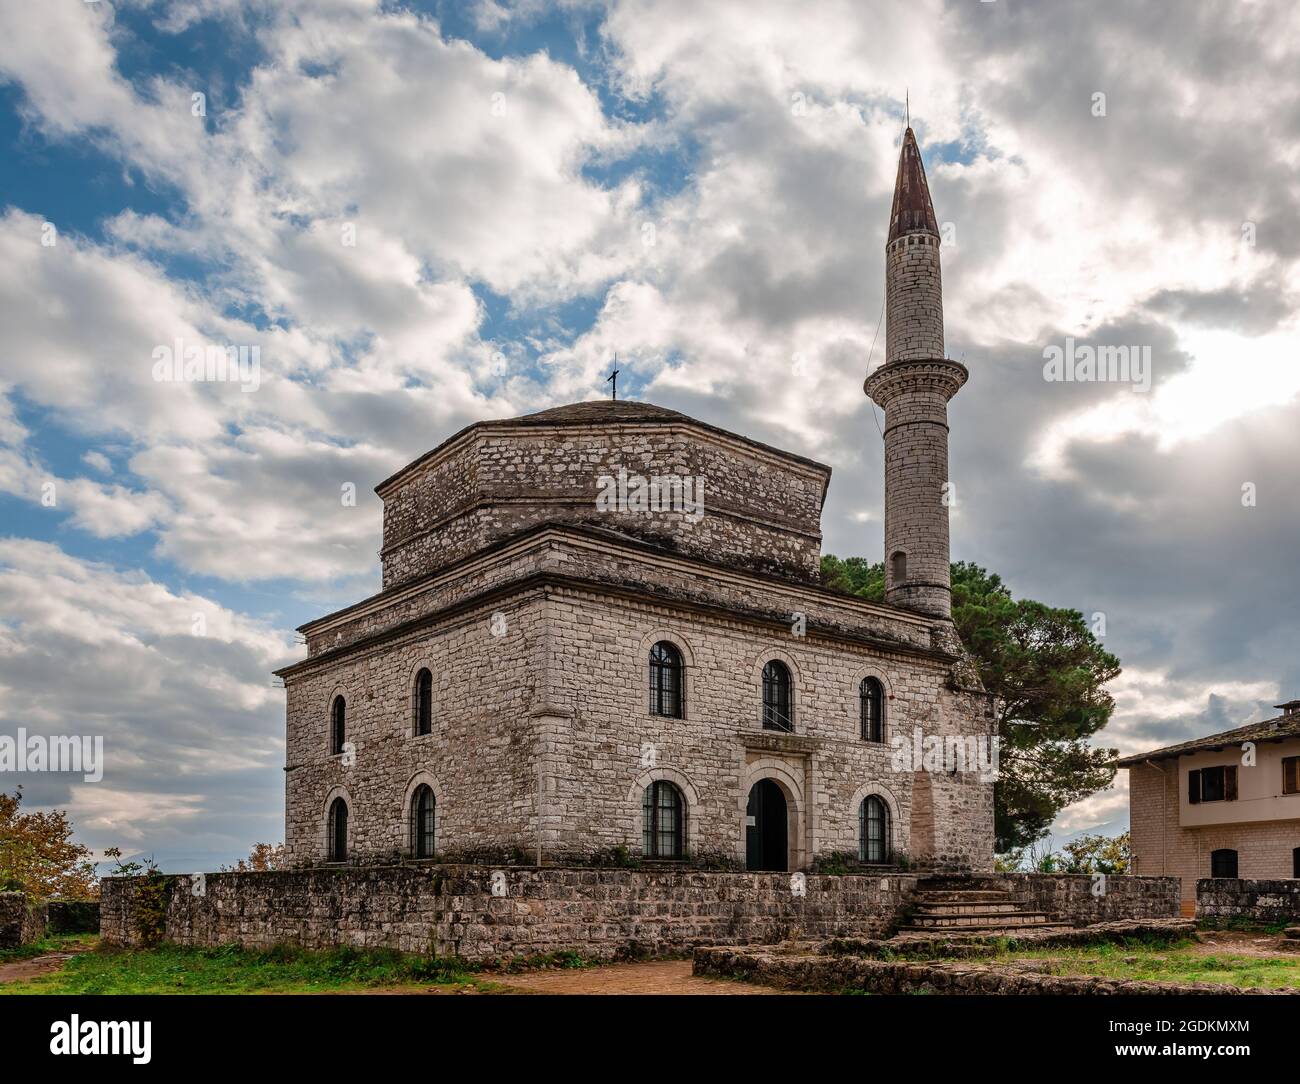 View of the Fethiye Mosque, in the Acropolis (Its Kale) of the Old City of Ioannina, Greece. Stock Photo